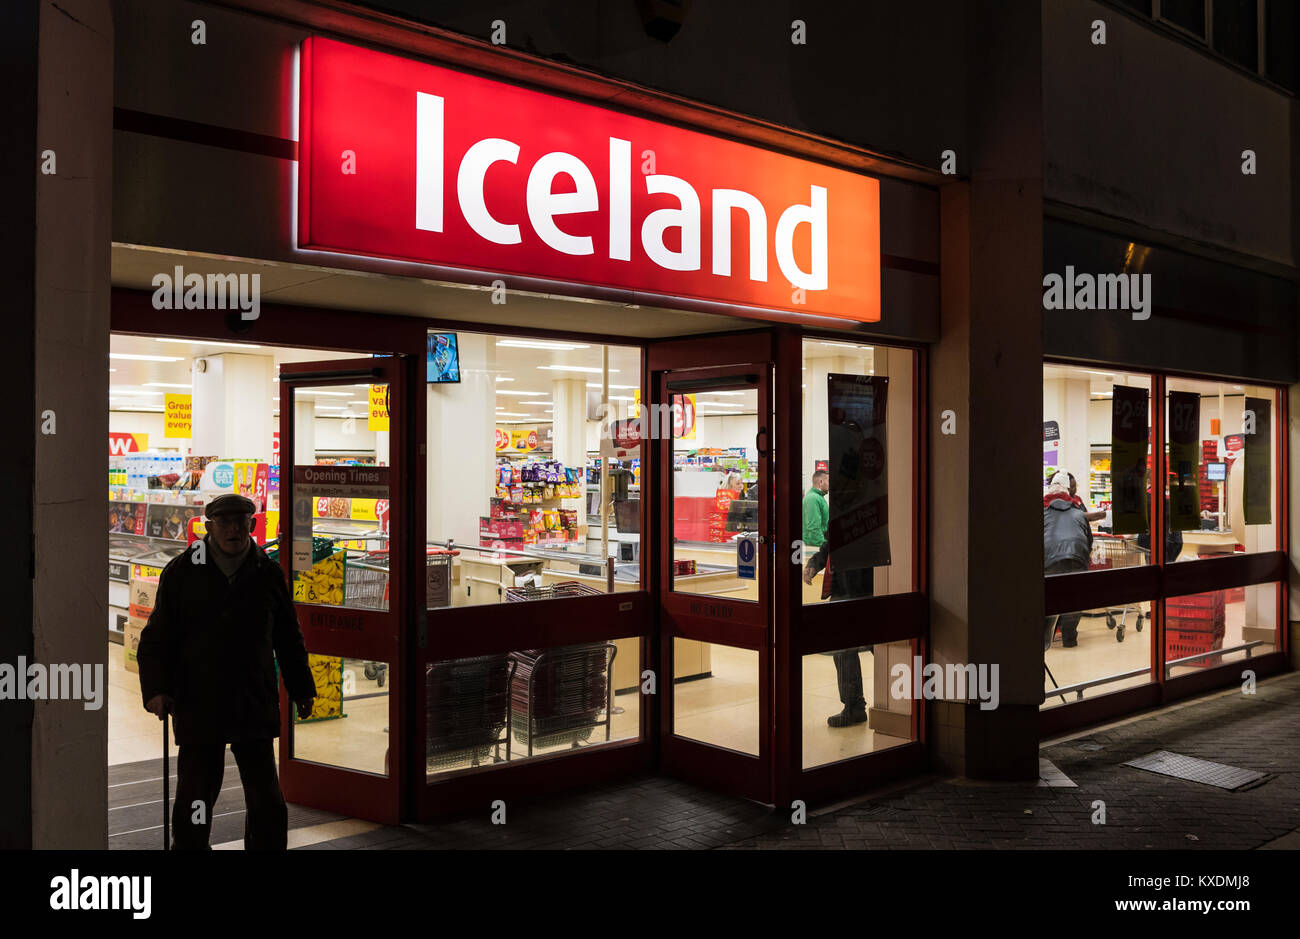 Iceland shop front entrance open after dark in Worthing, West Sussex, England, UK. Stock Photo